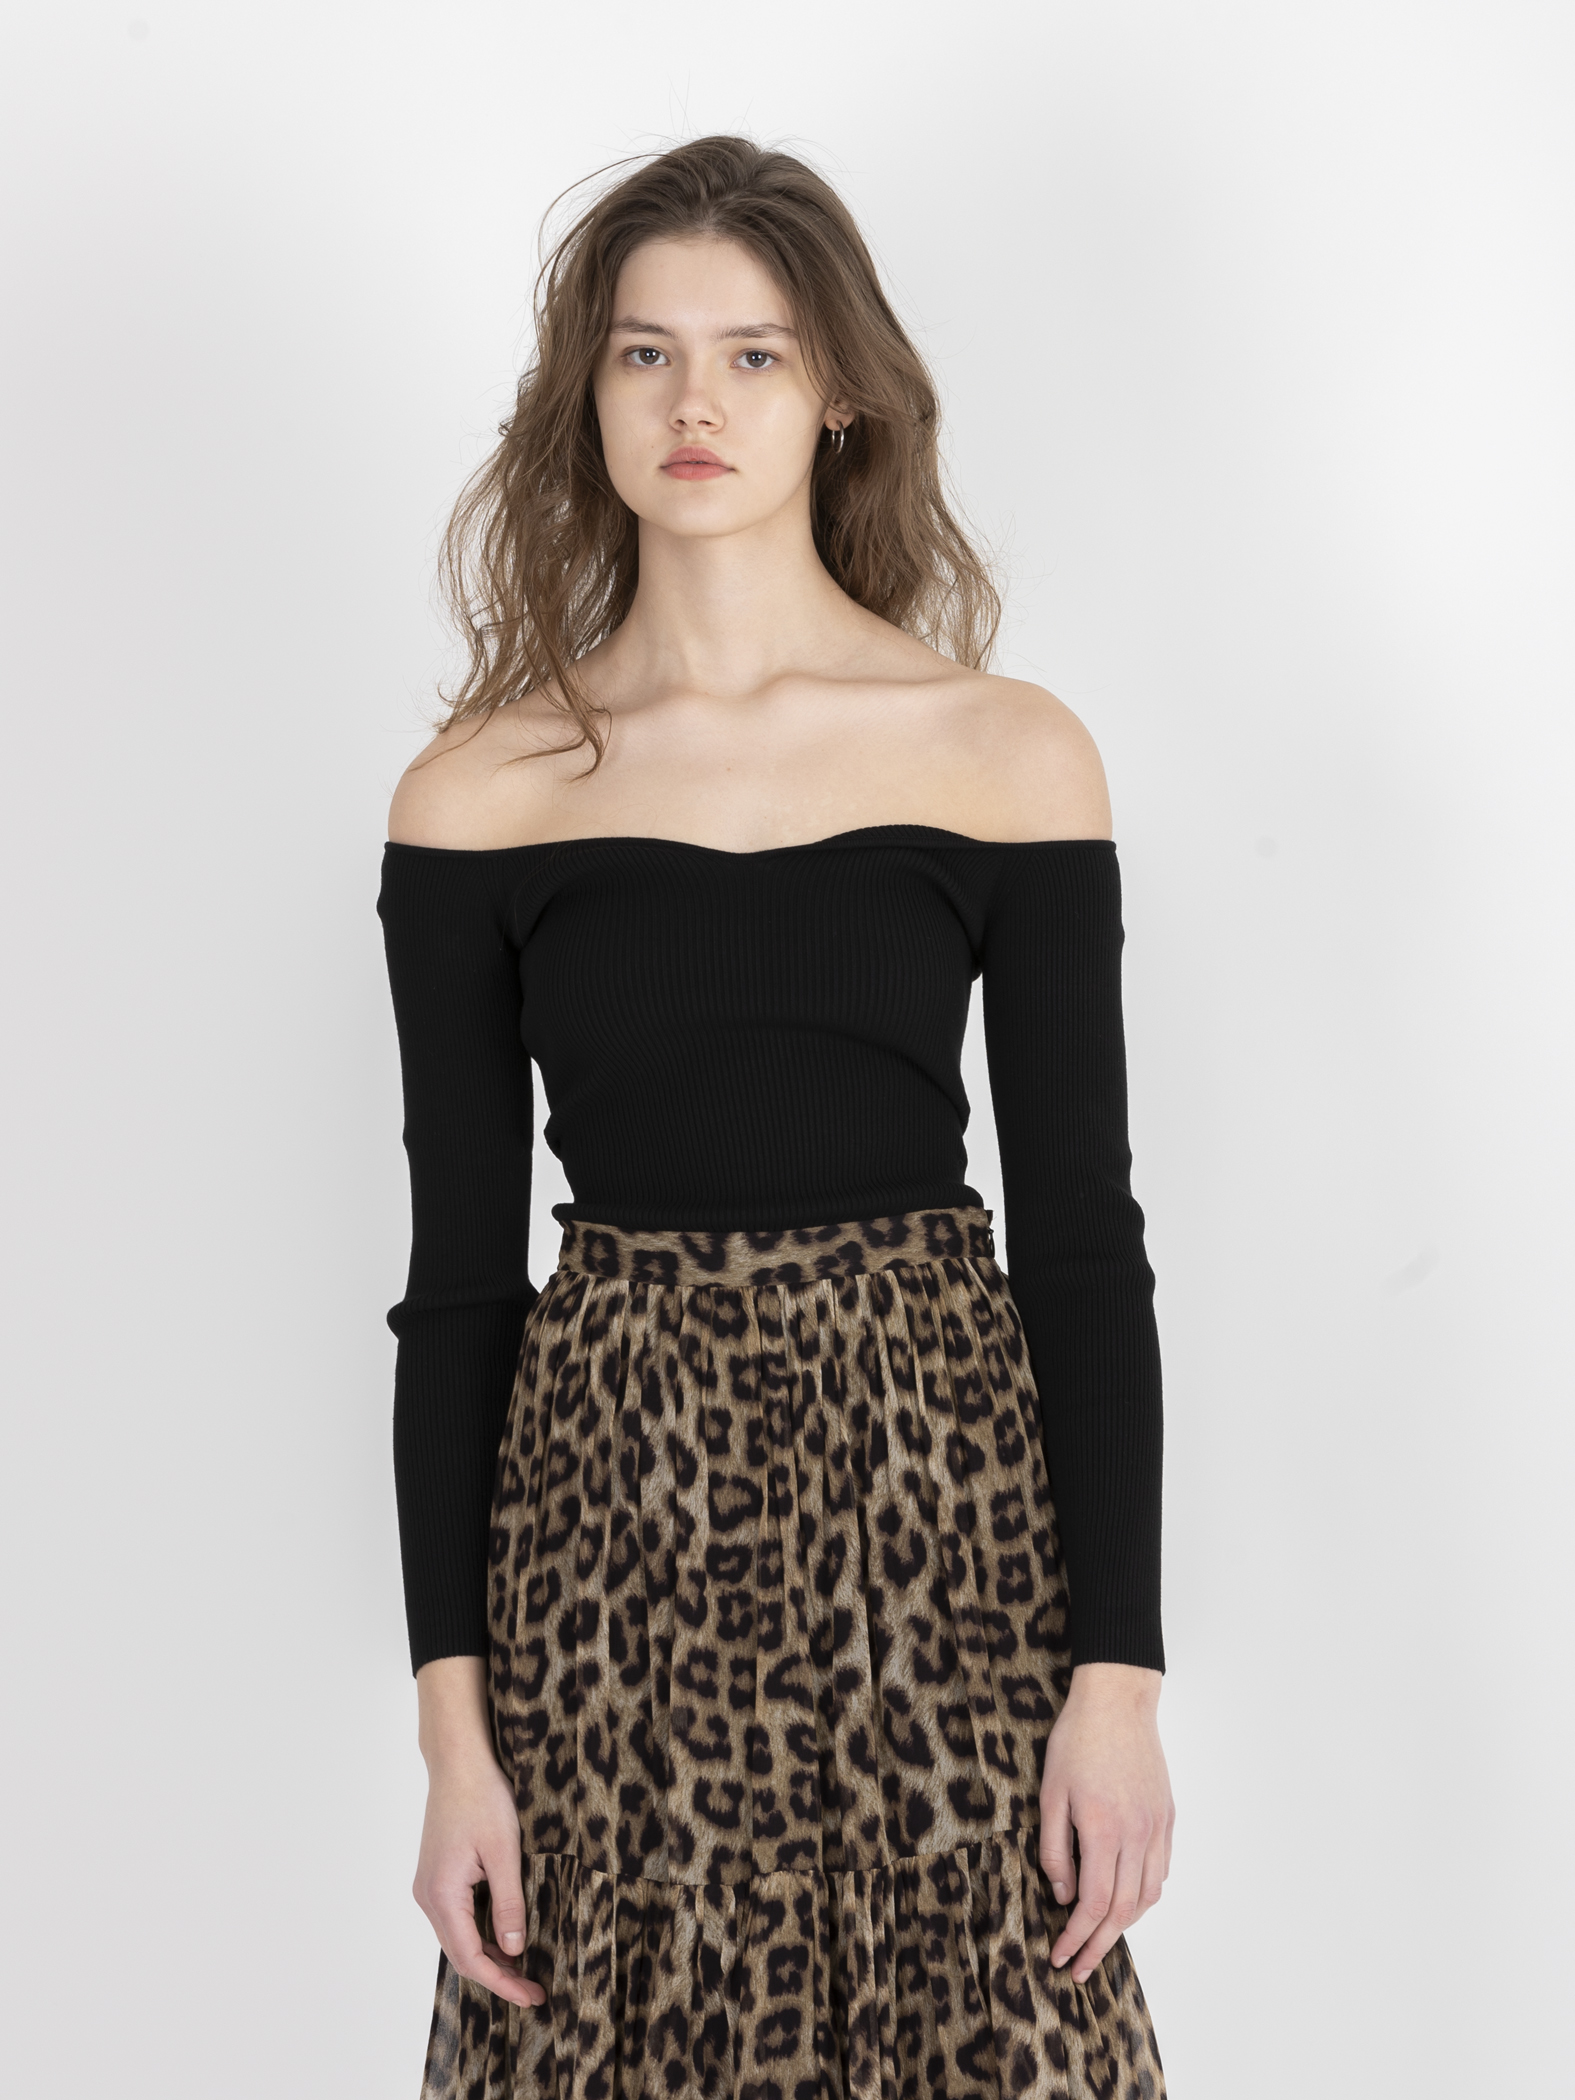 owai-black0knit-ribbed-top-sweatheart-neckline-fitted-bash-matchboxathens